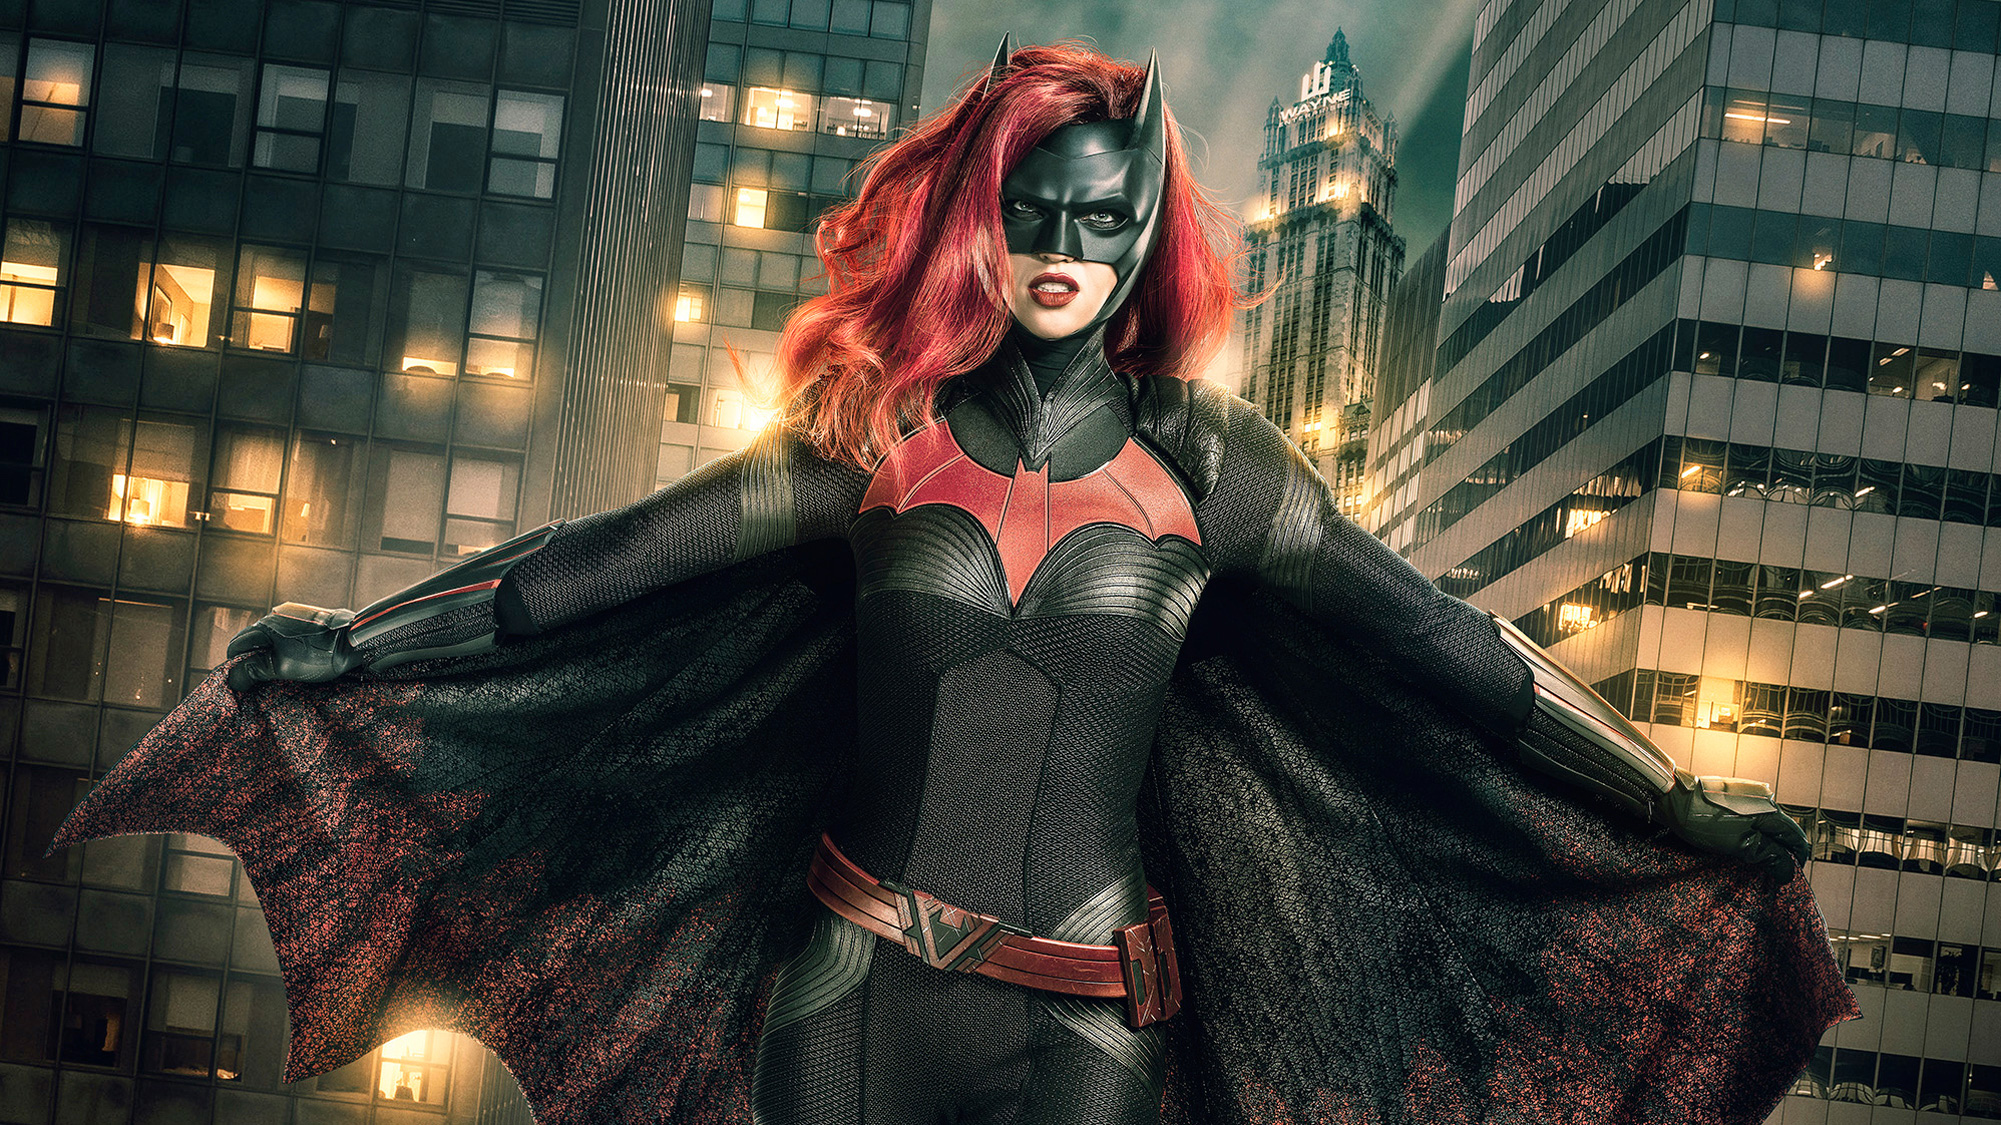 The CW Ruby Rose As Batwoman, HD Tv Shows, 4k Wallpaper, Image